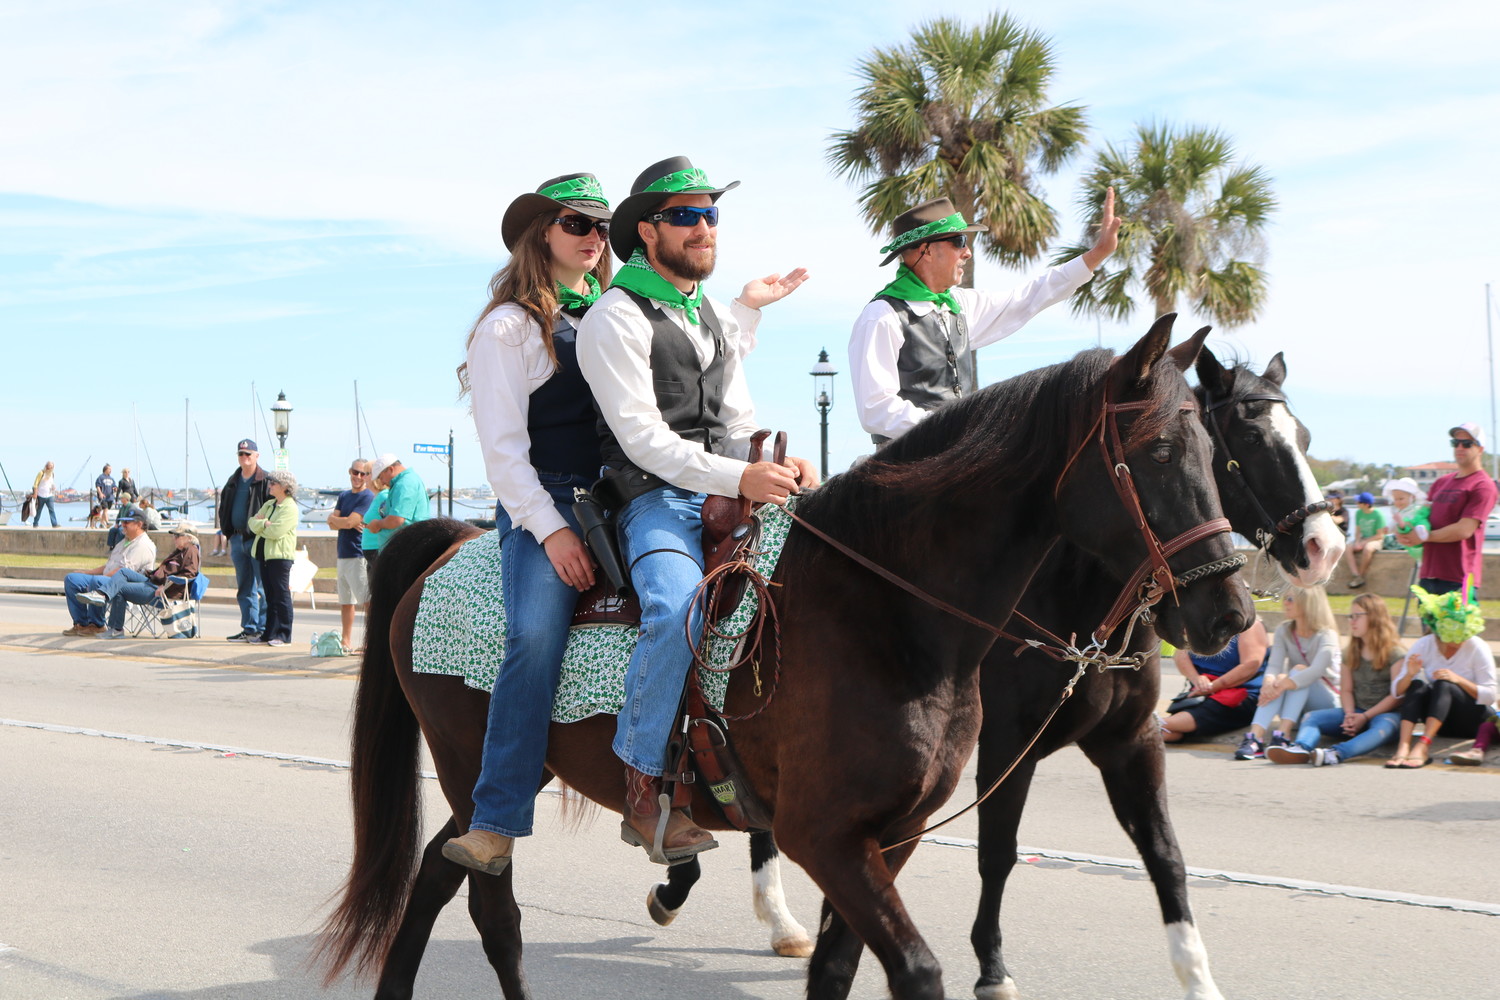 One of the horse units at the parade travels down Avenida Menendez.